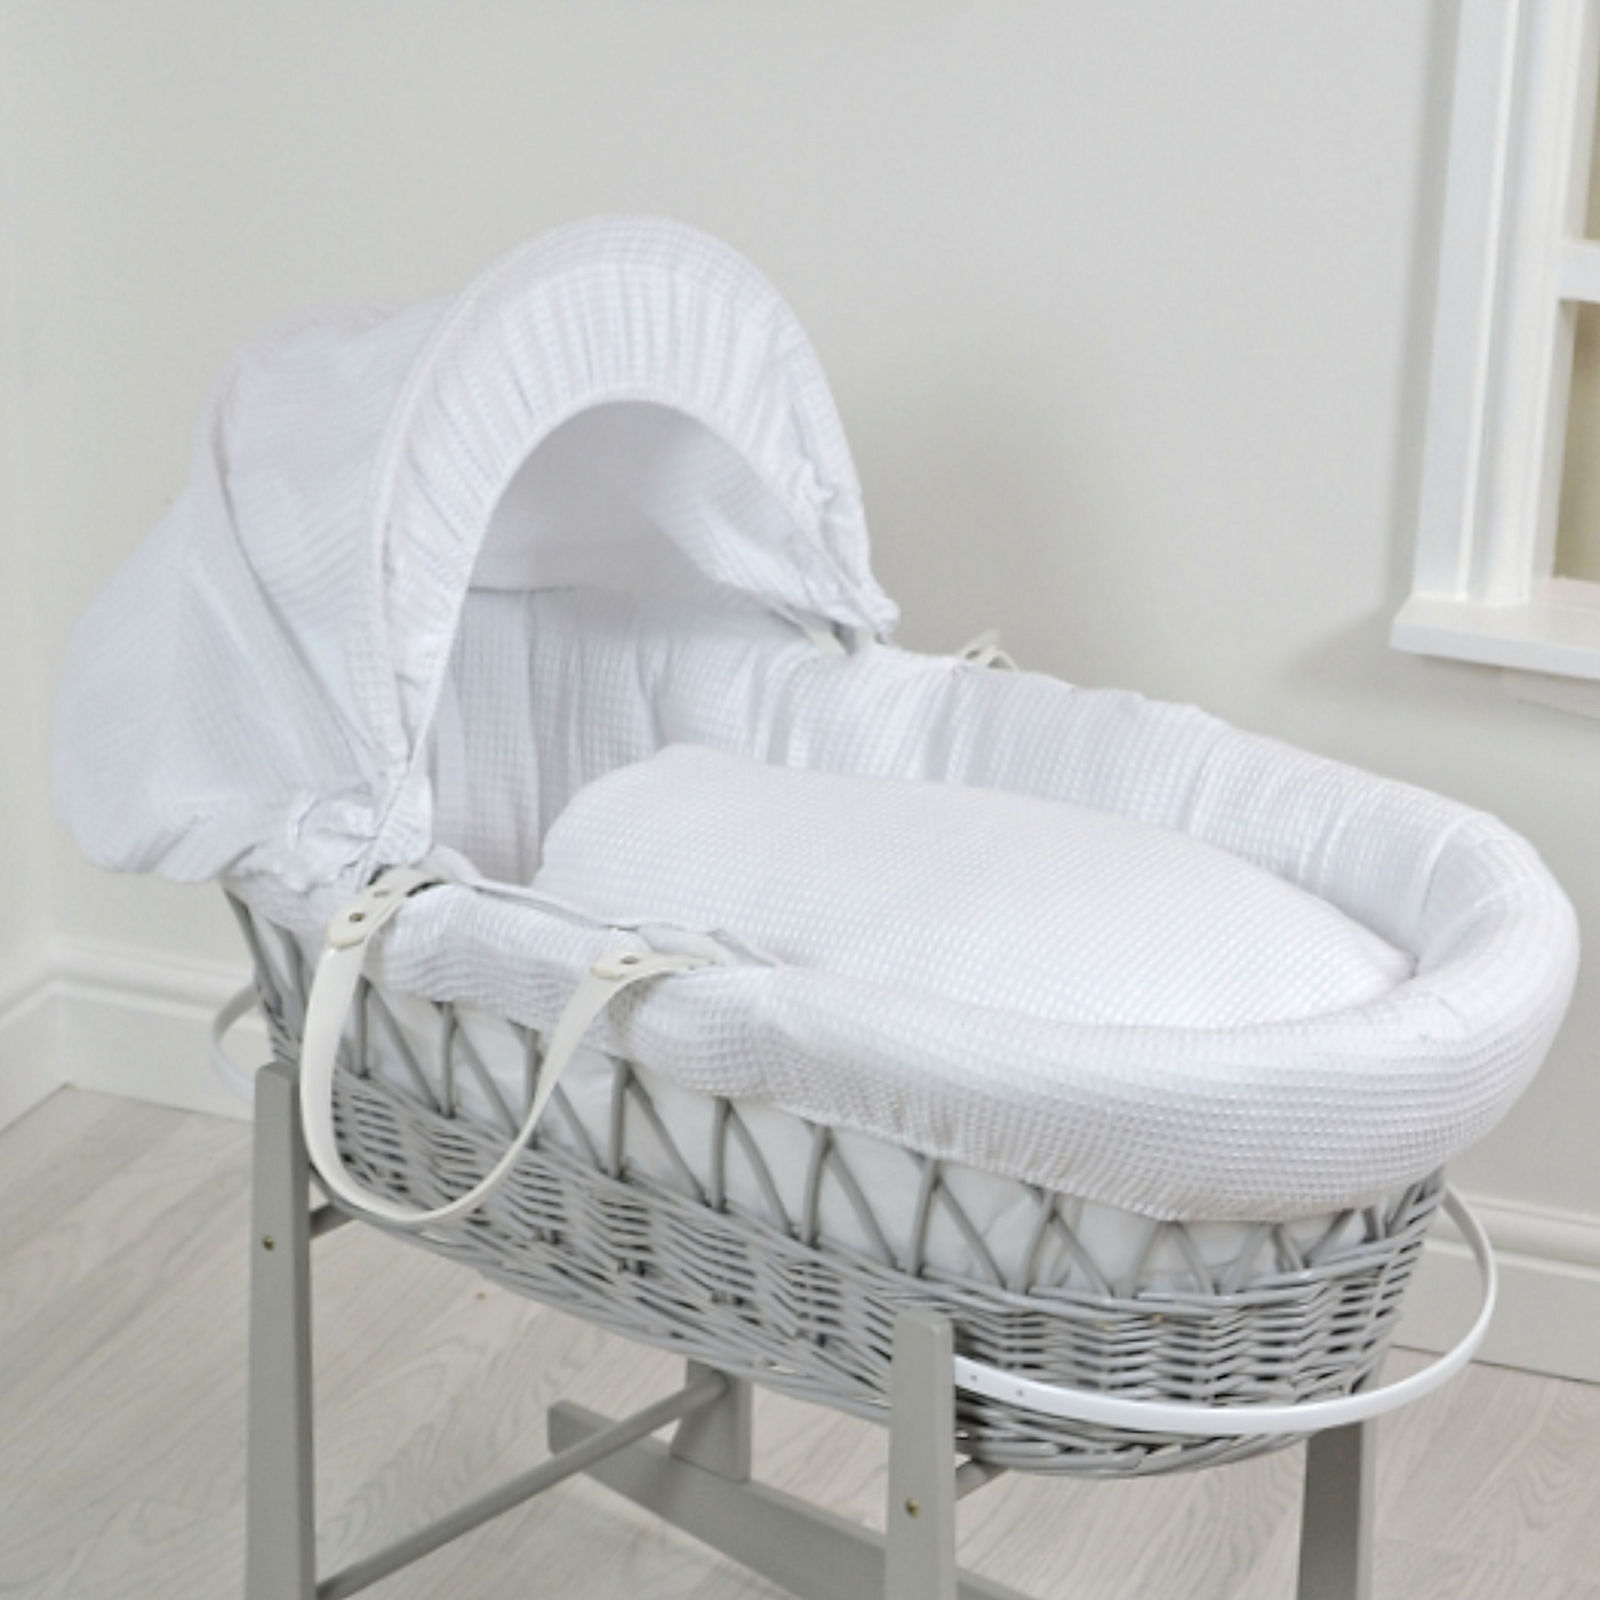 wicker bassinet basket with stand